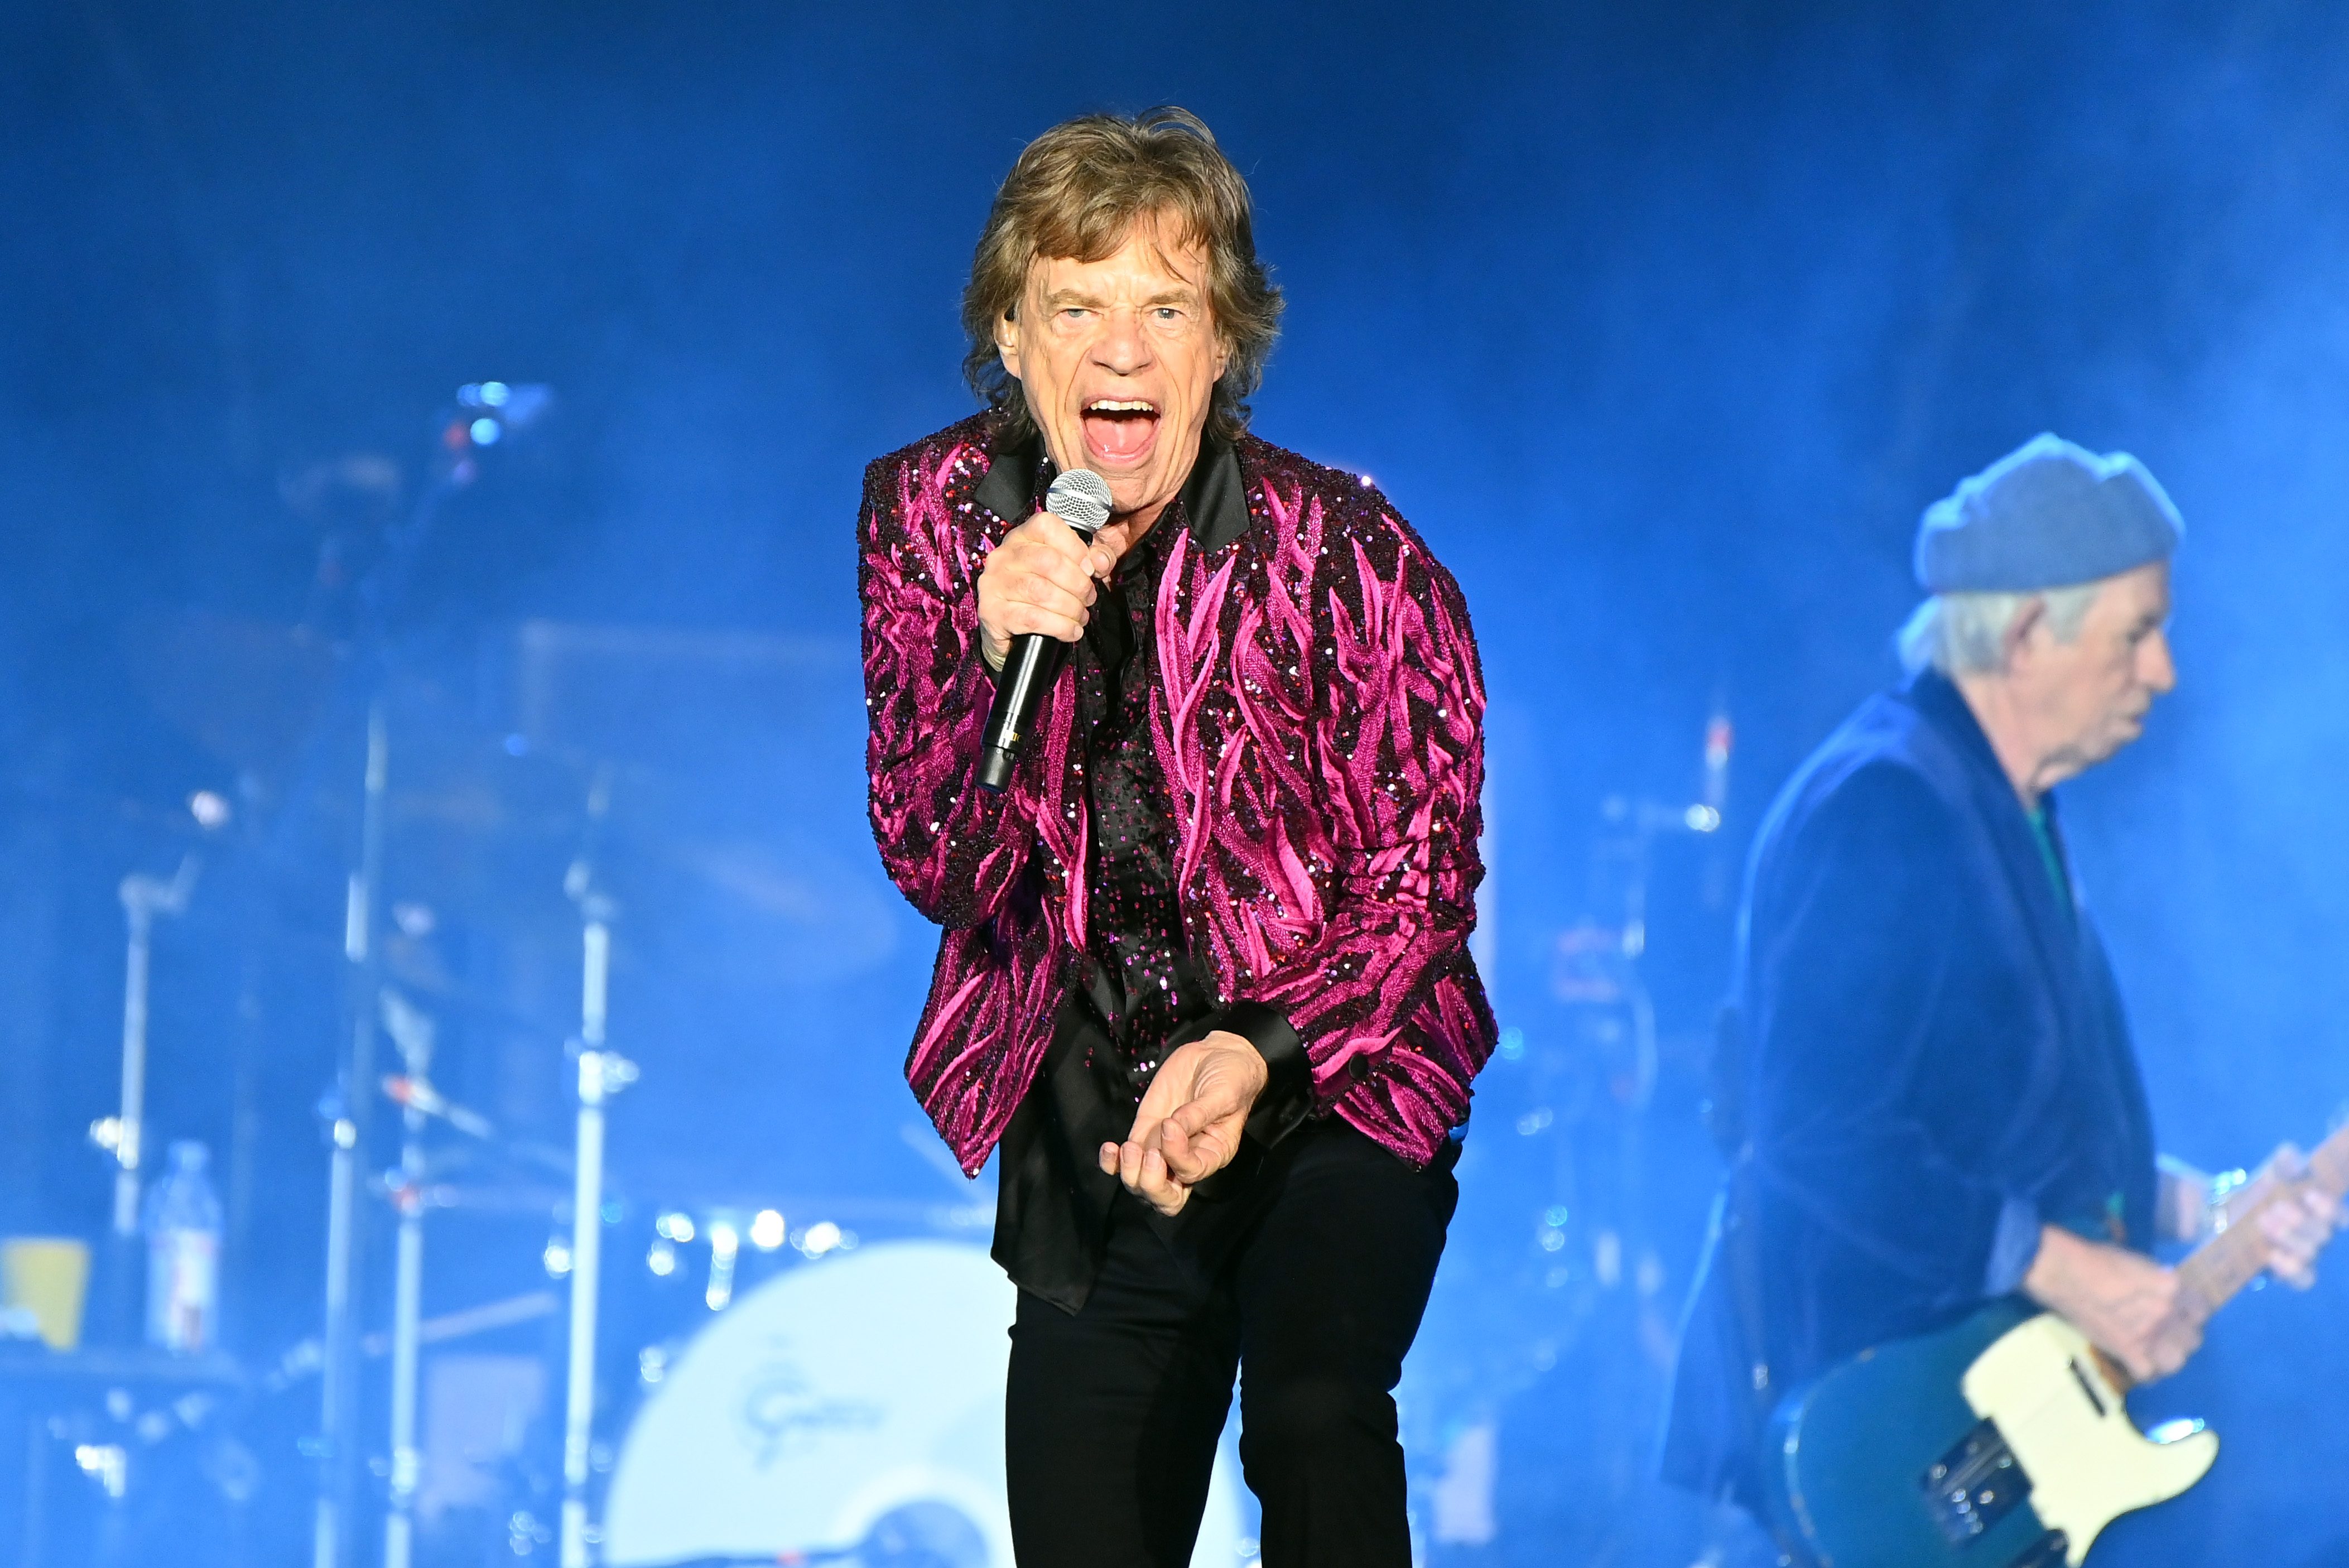 Mick Jagger of The Rolling Stones performs during the 2021 "No Filter" tour at Mercedes-Benz Stadium on November 11, 2021 in Atlanta, Georgia.